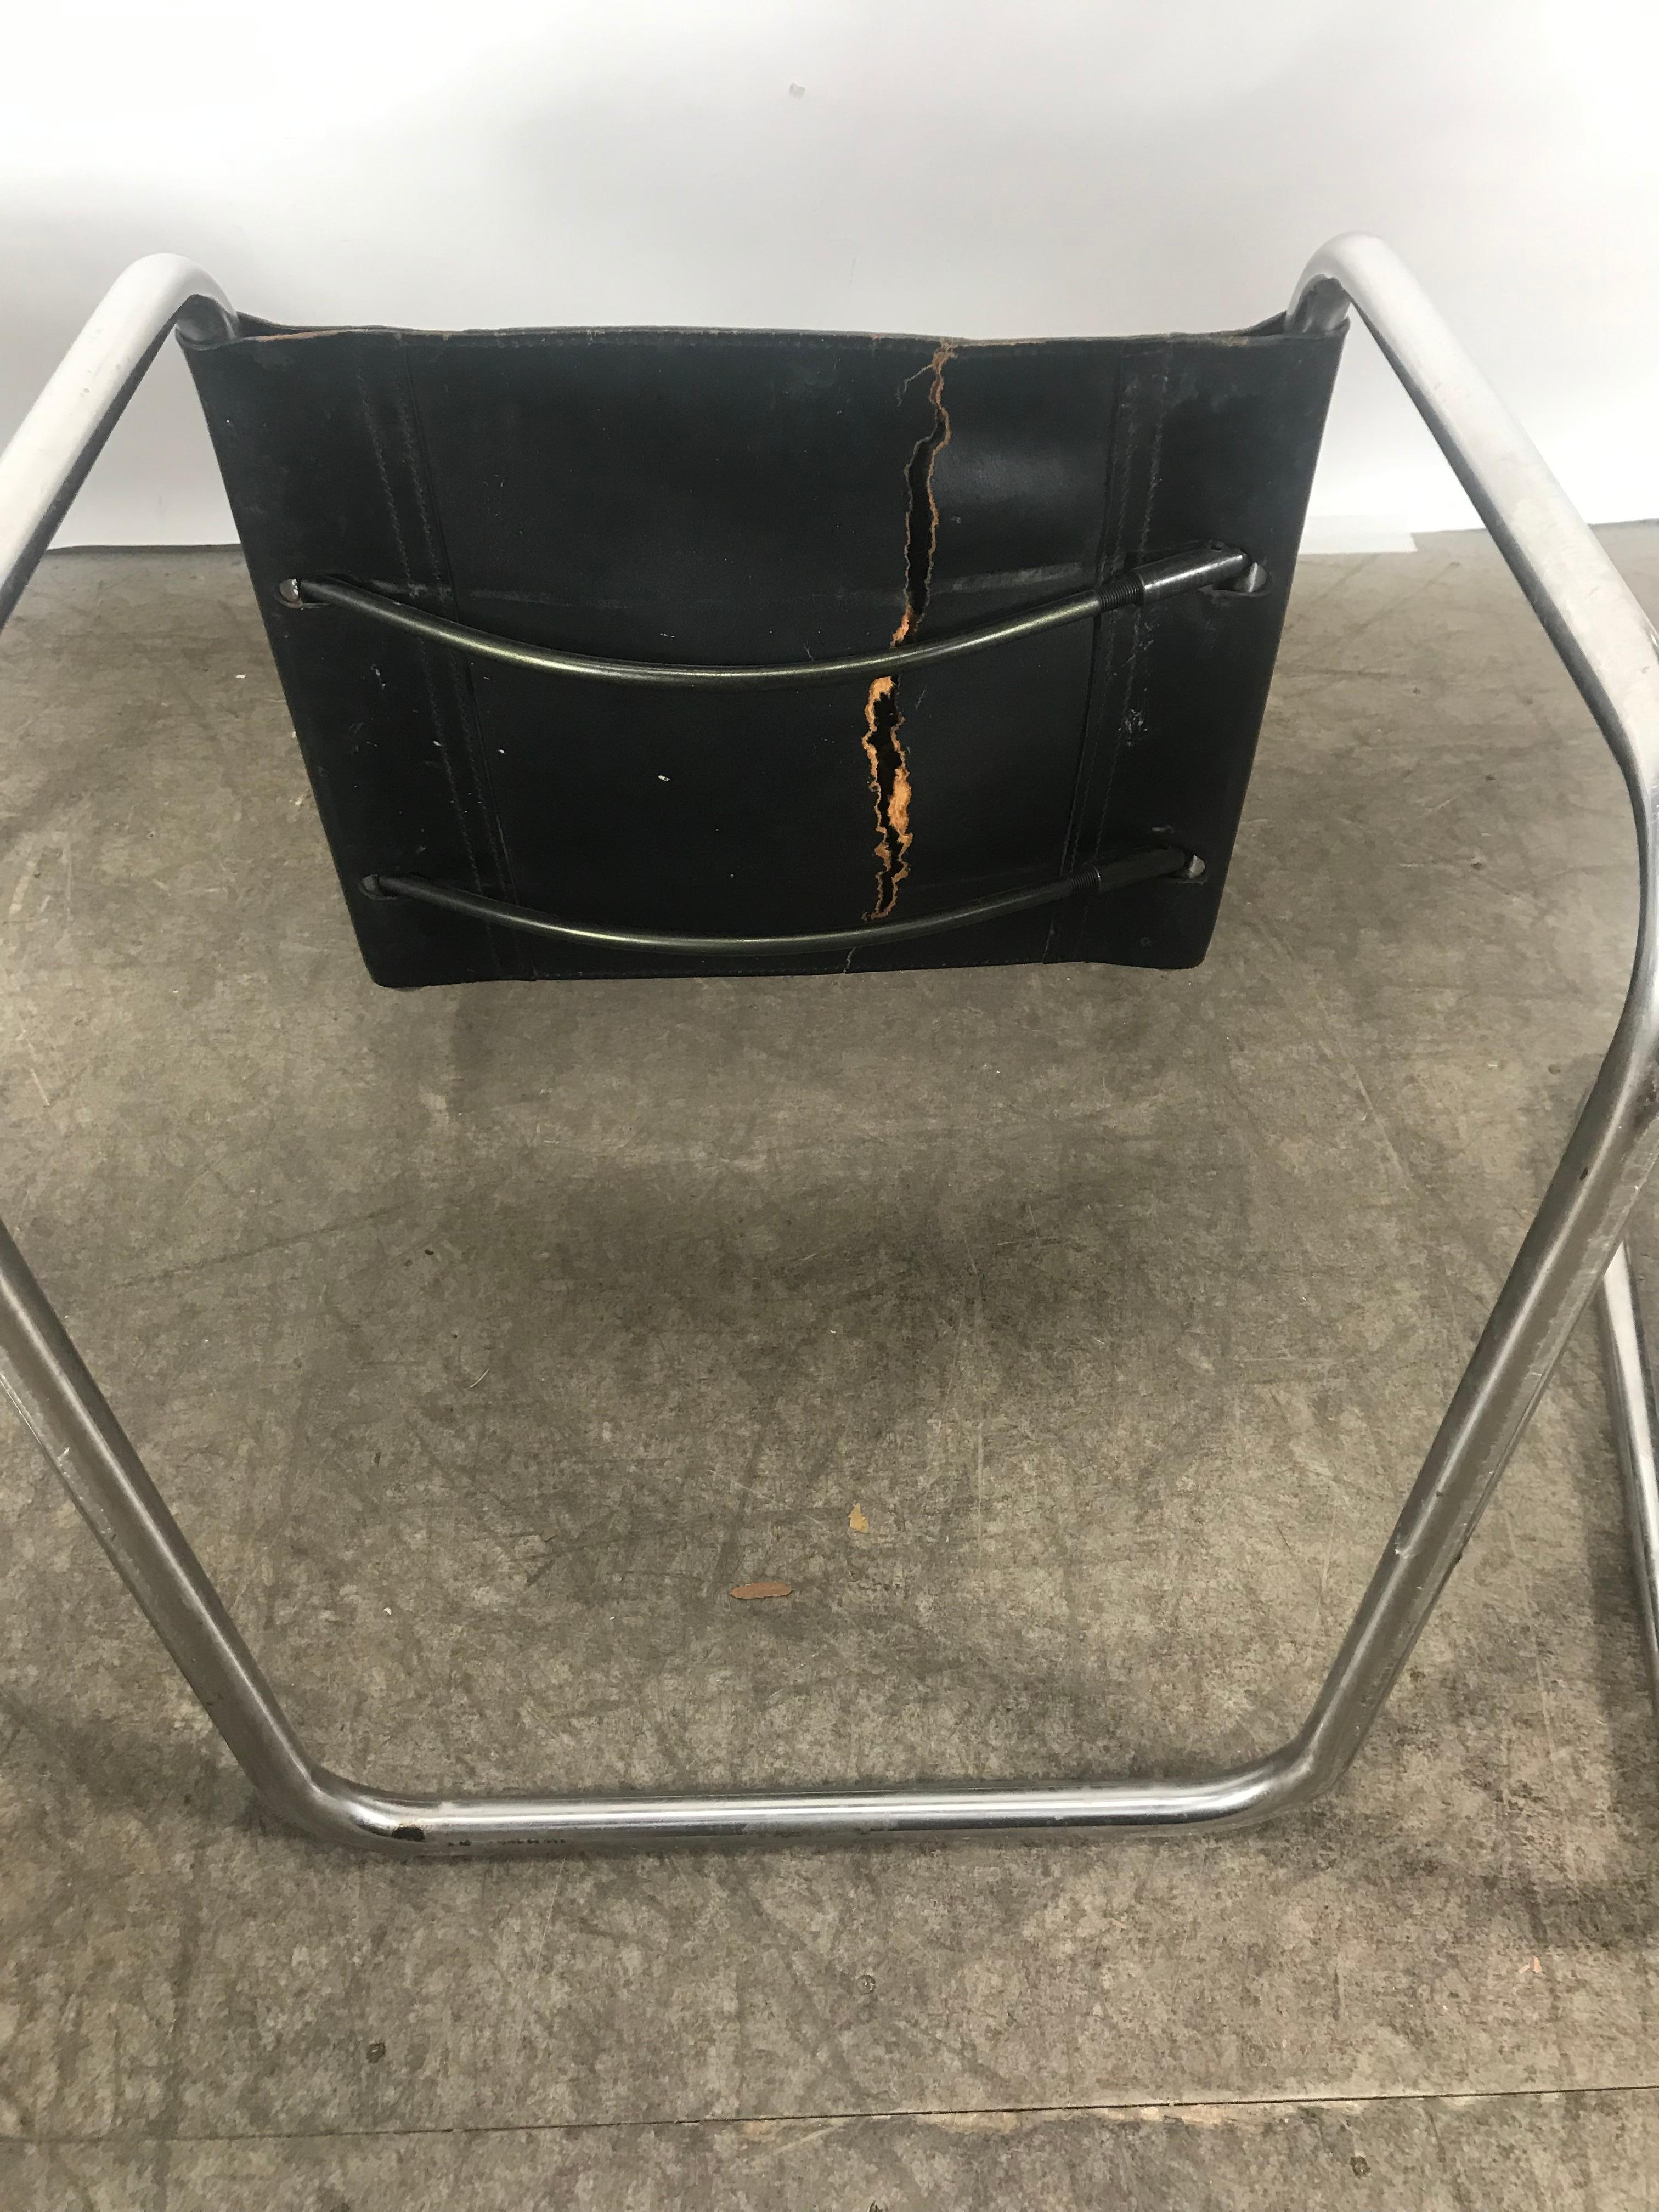 20th Century Set of 4 Black Leather and Chrome Bauhaus Style Side Chairs After Mart Stam